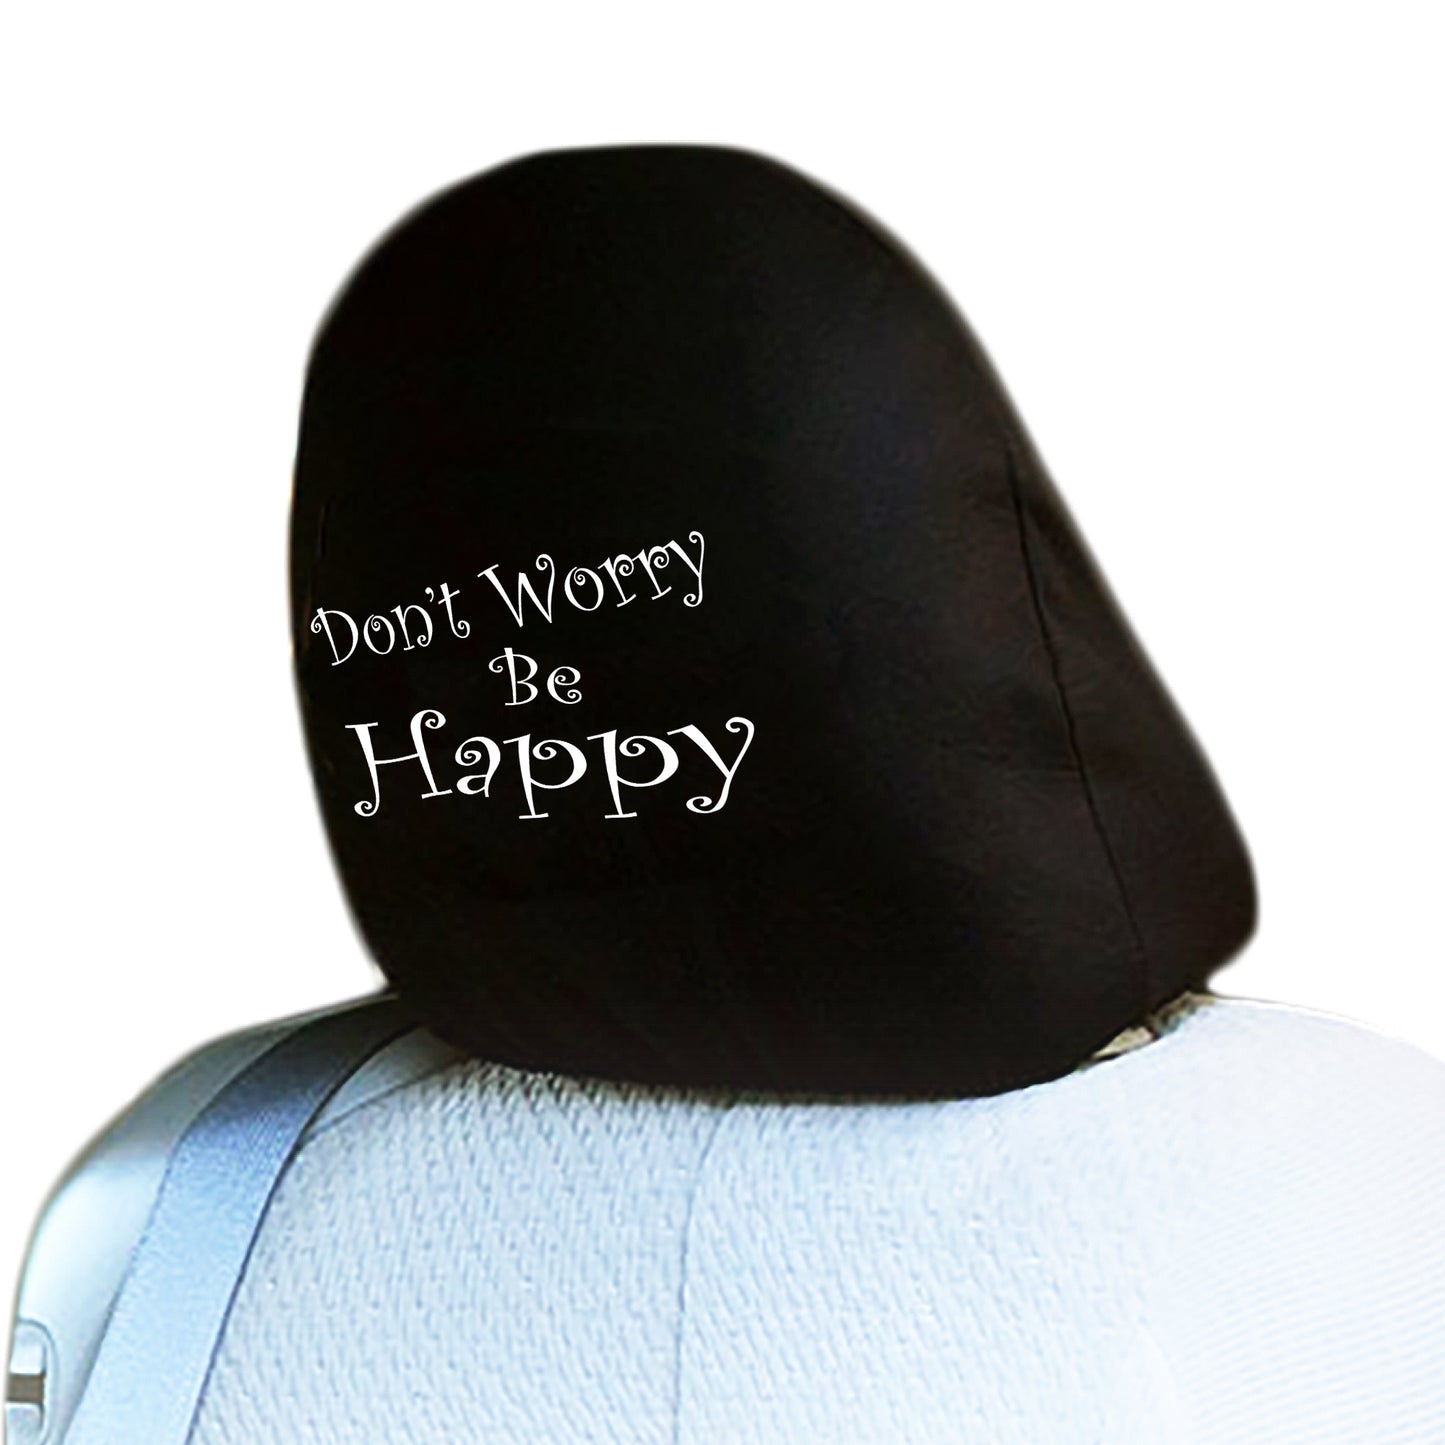 Embroidery Don't Worry Be Happy Logo Design Auto Truck SUV Car Seat Headrest Cover Accessory 1 Piece - Yupbizauto